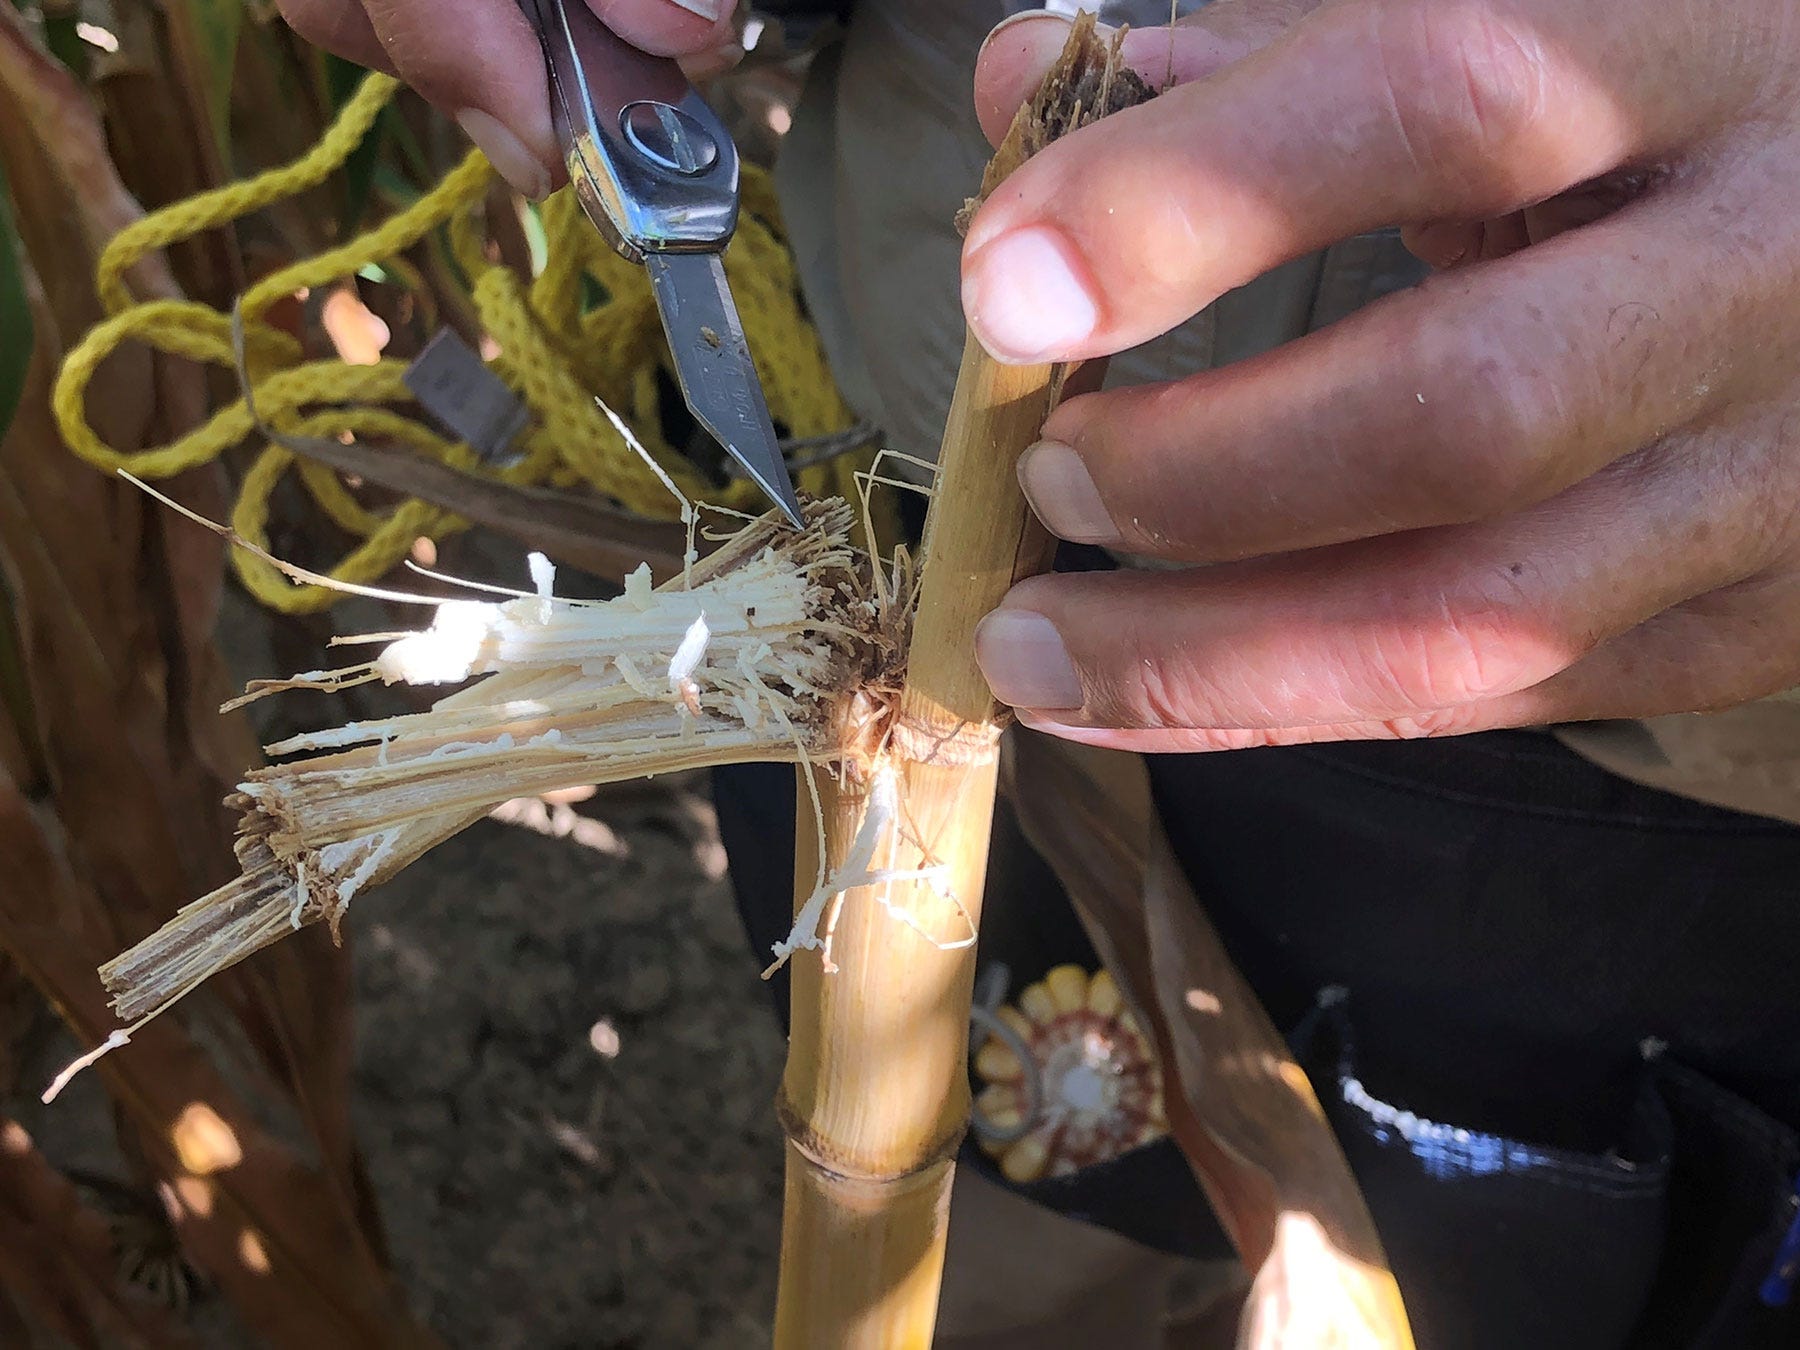 hand holding a cornstalk while a pocketknife cuts into it